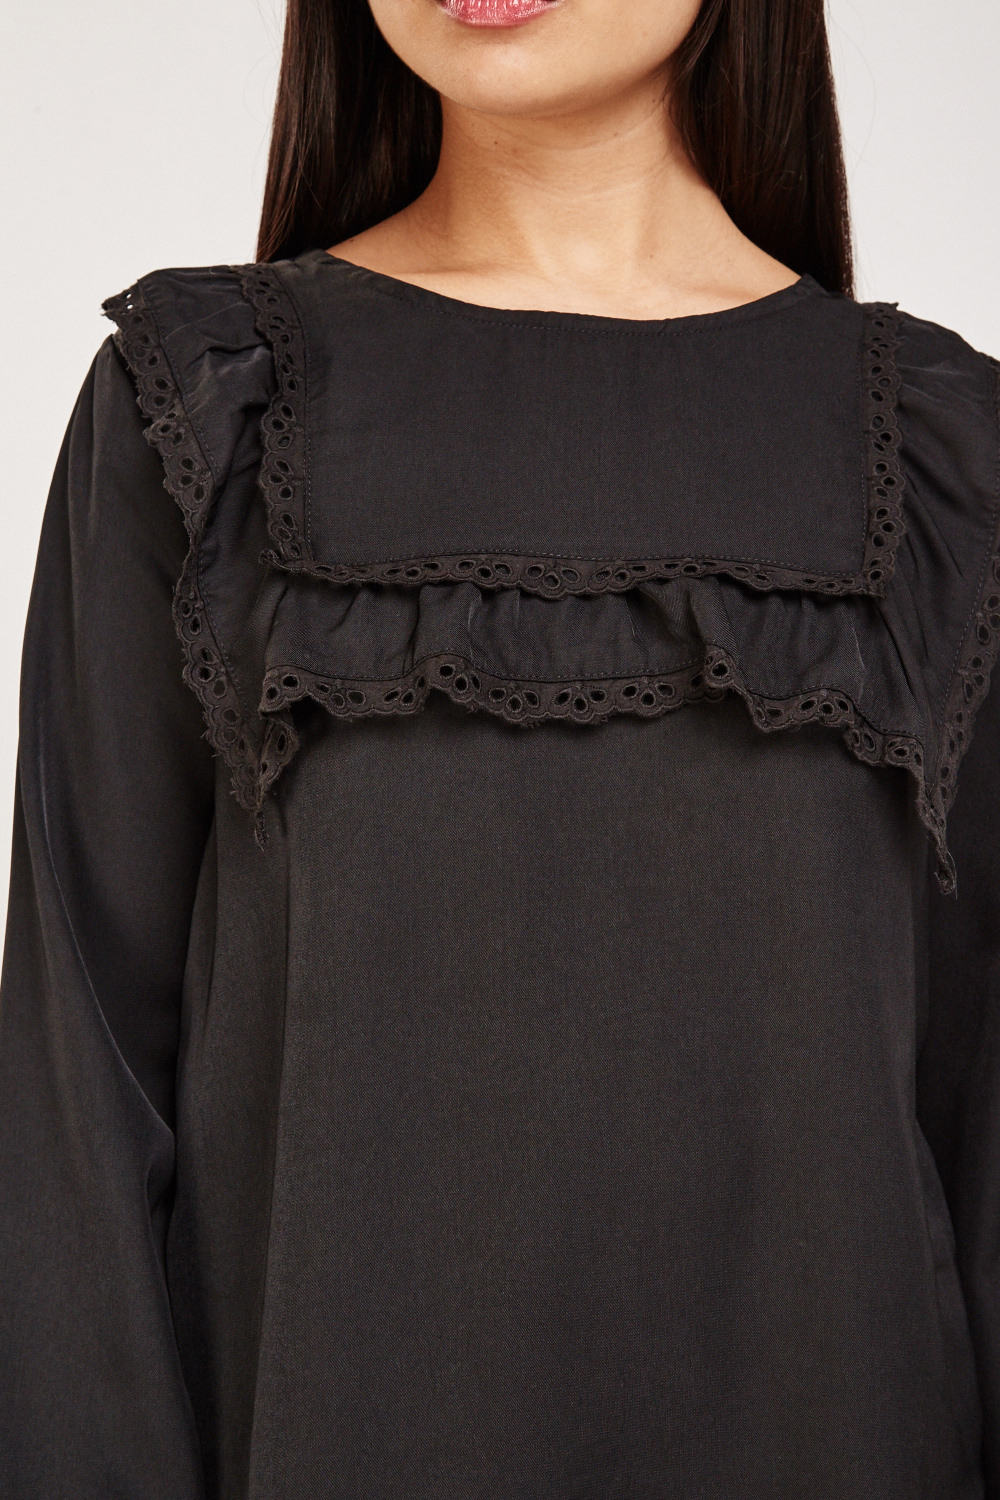 Broderie Bib Front Blouse - Just $2